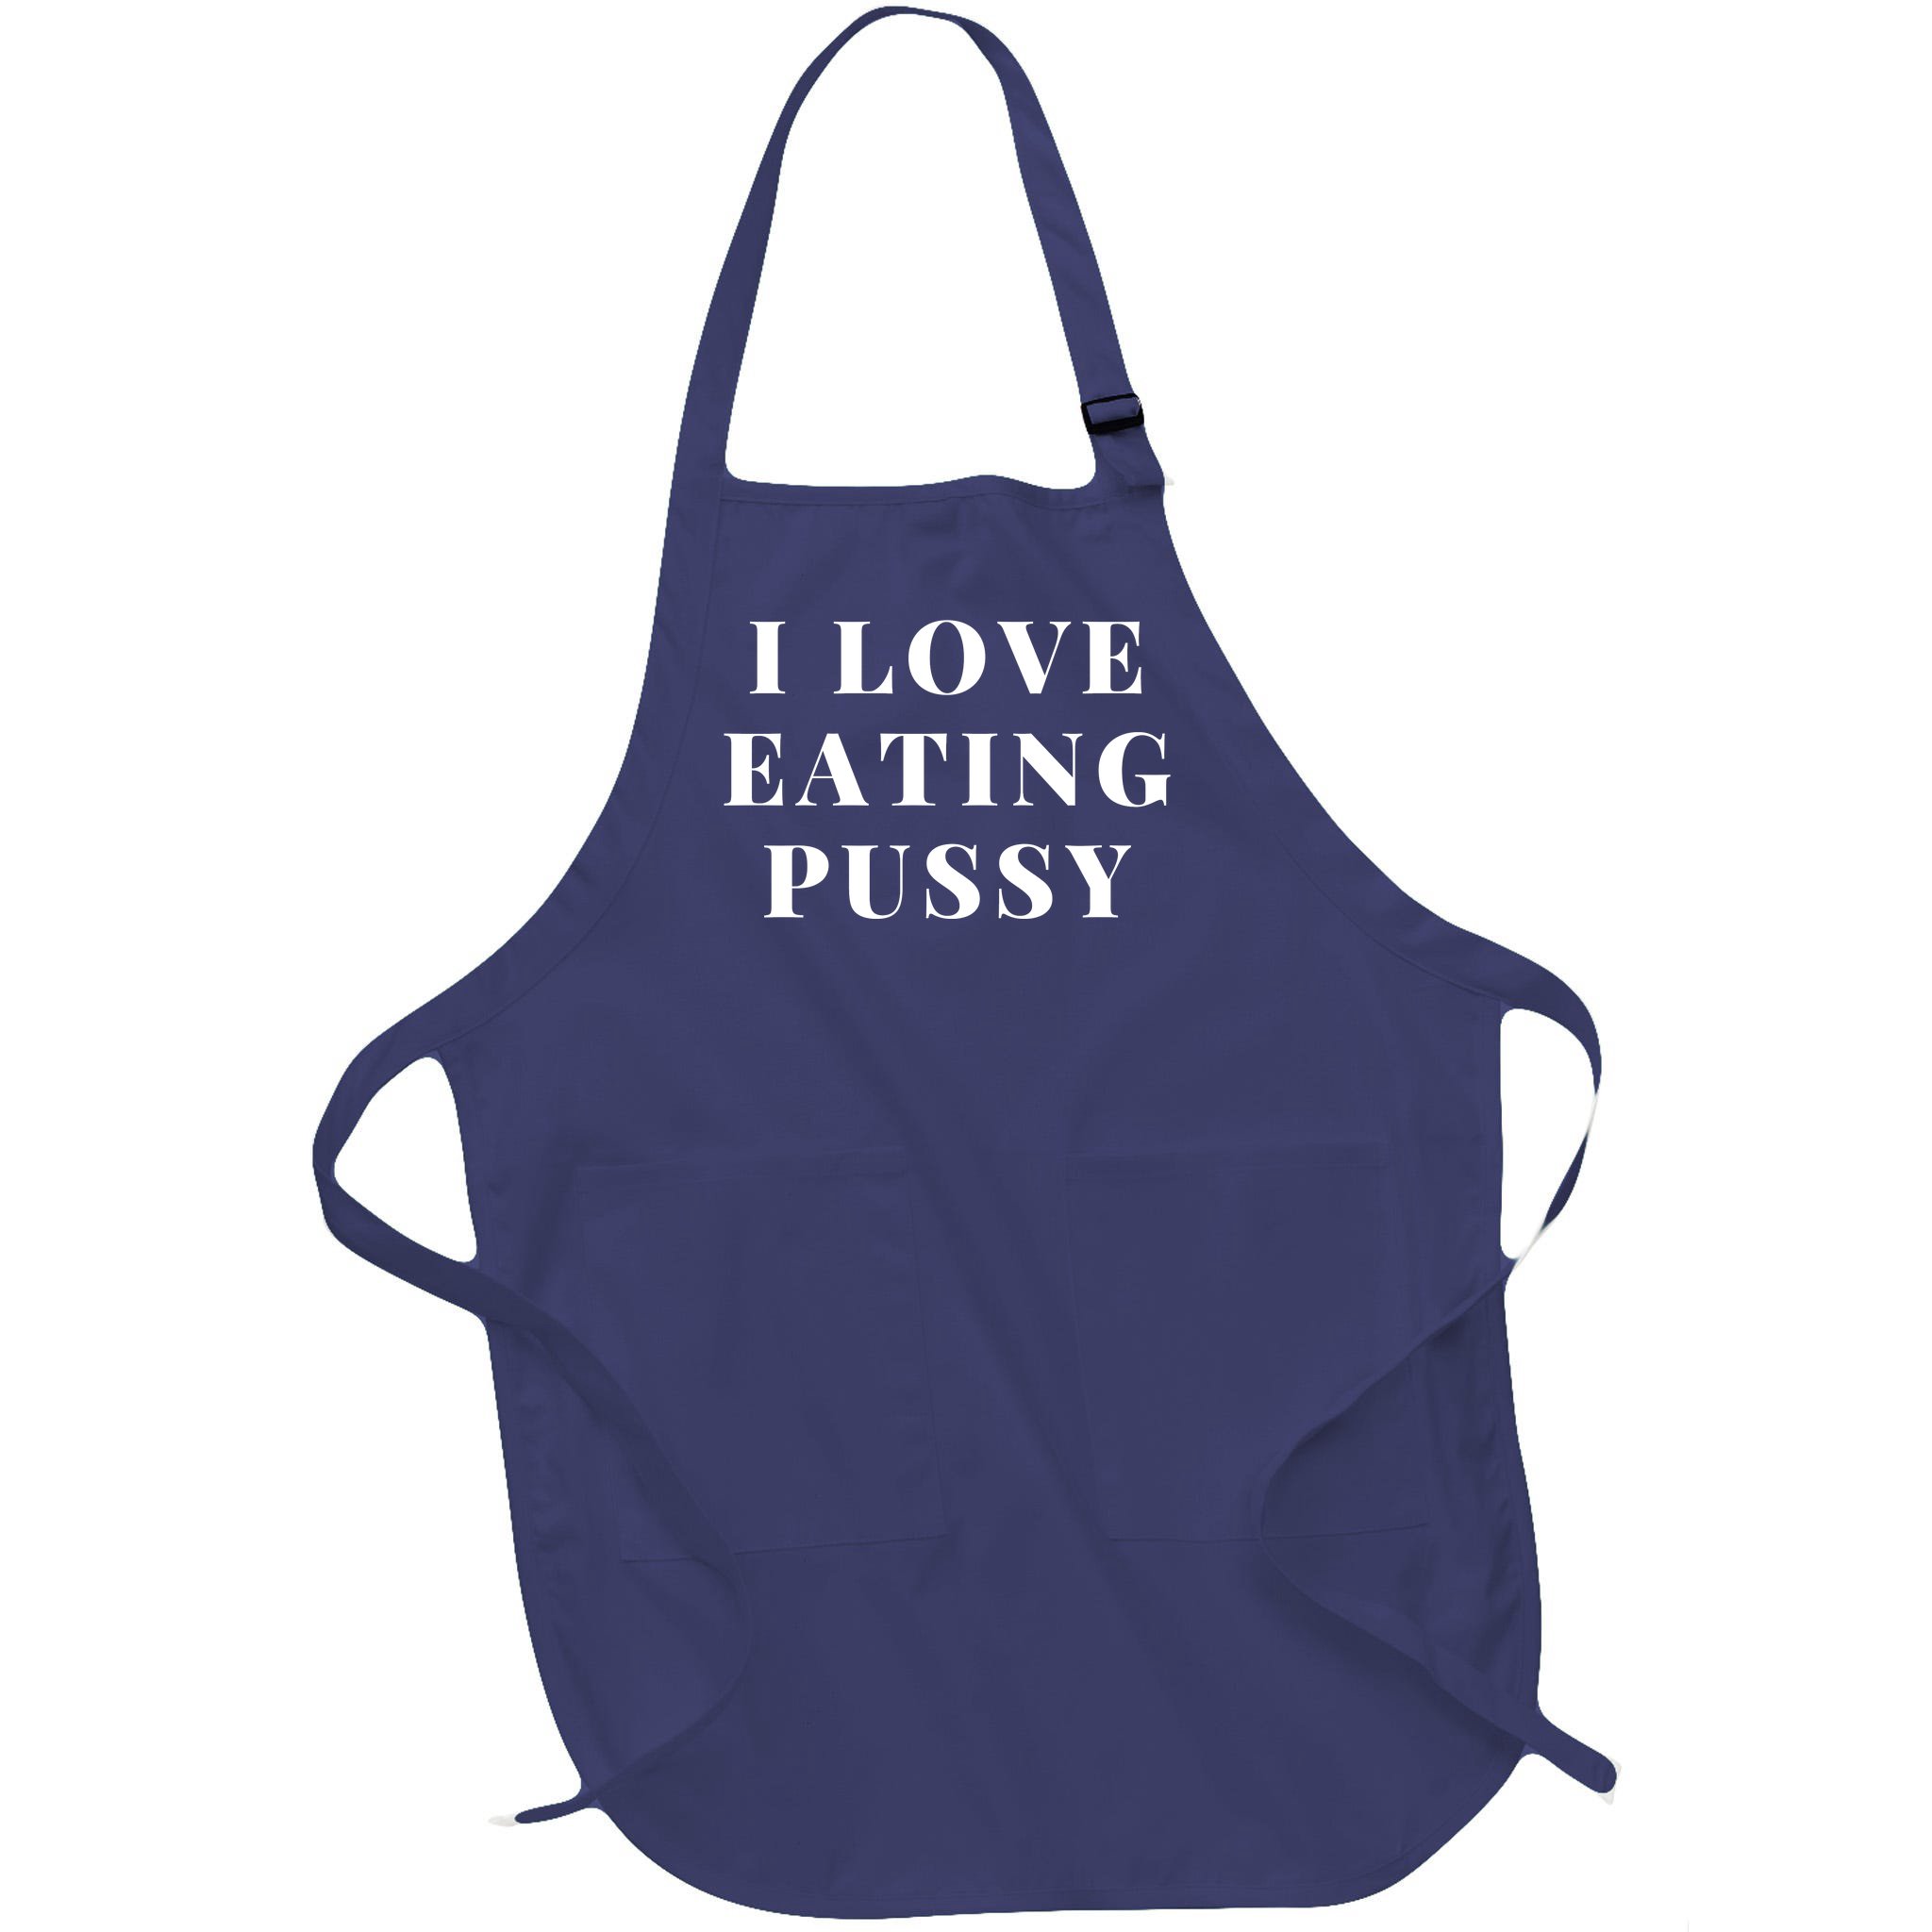 I Love Eating Pussy Funny Sexy Adult Distressed Profanity Full-Length Apron With Pocket TeeShirtPalace image pic